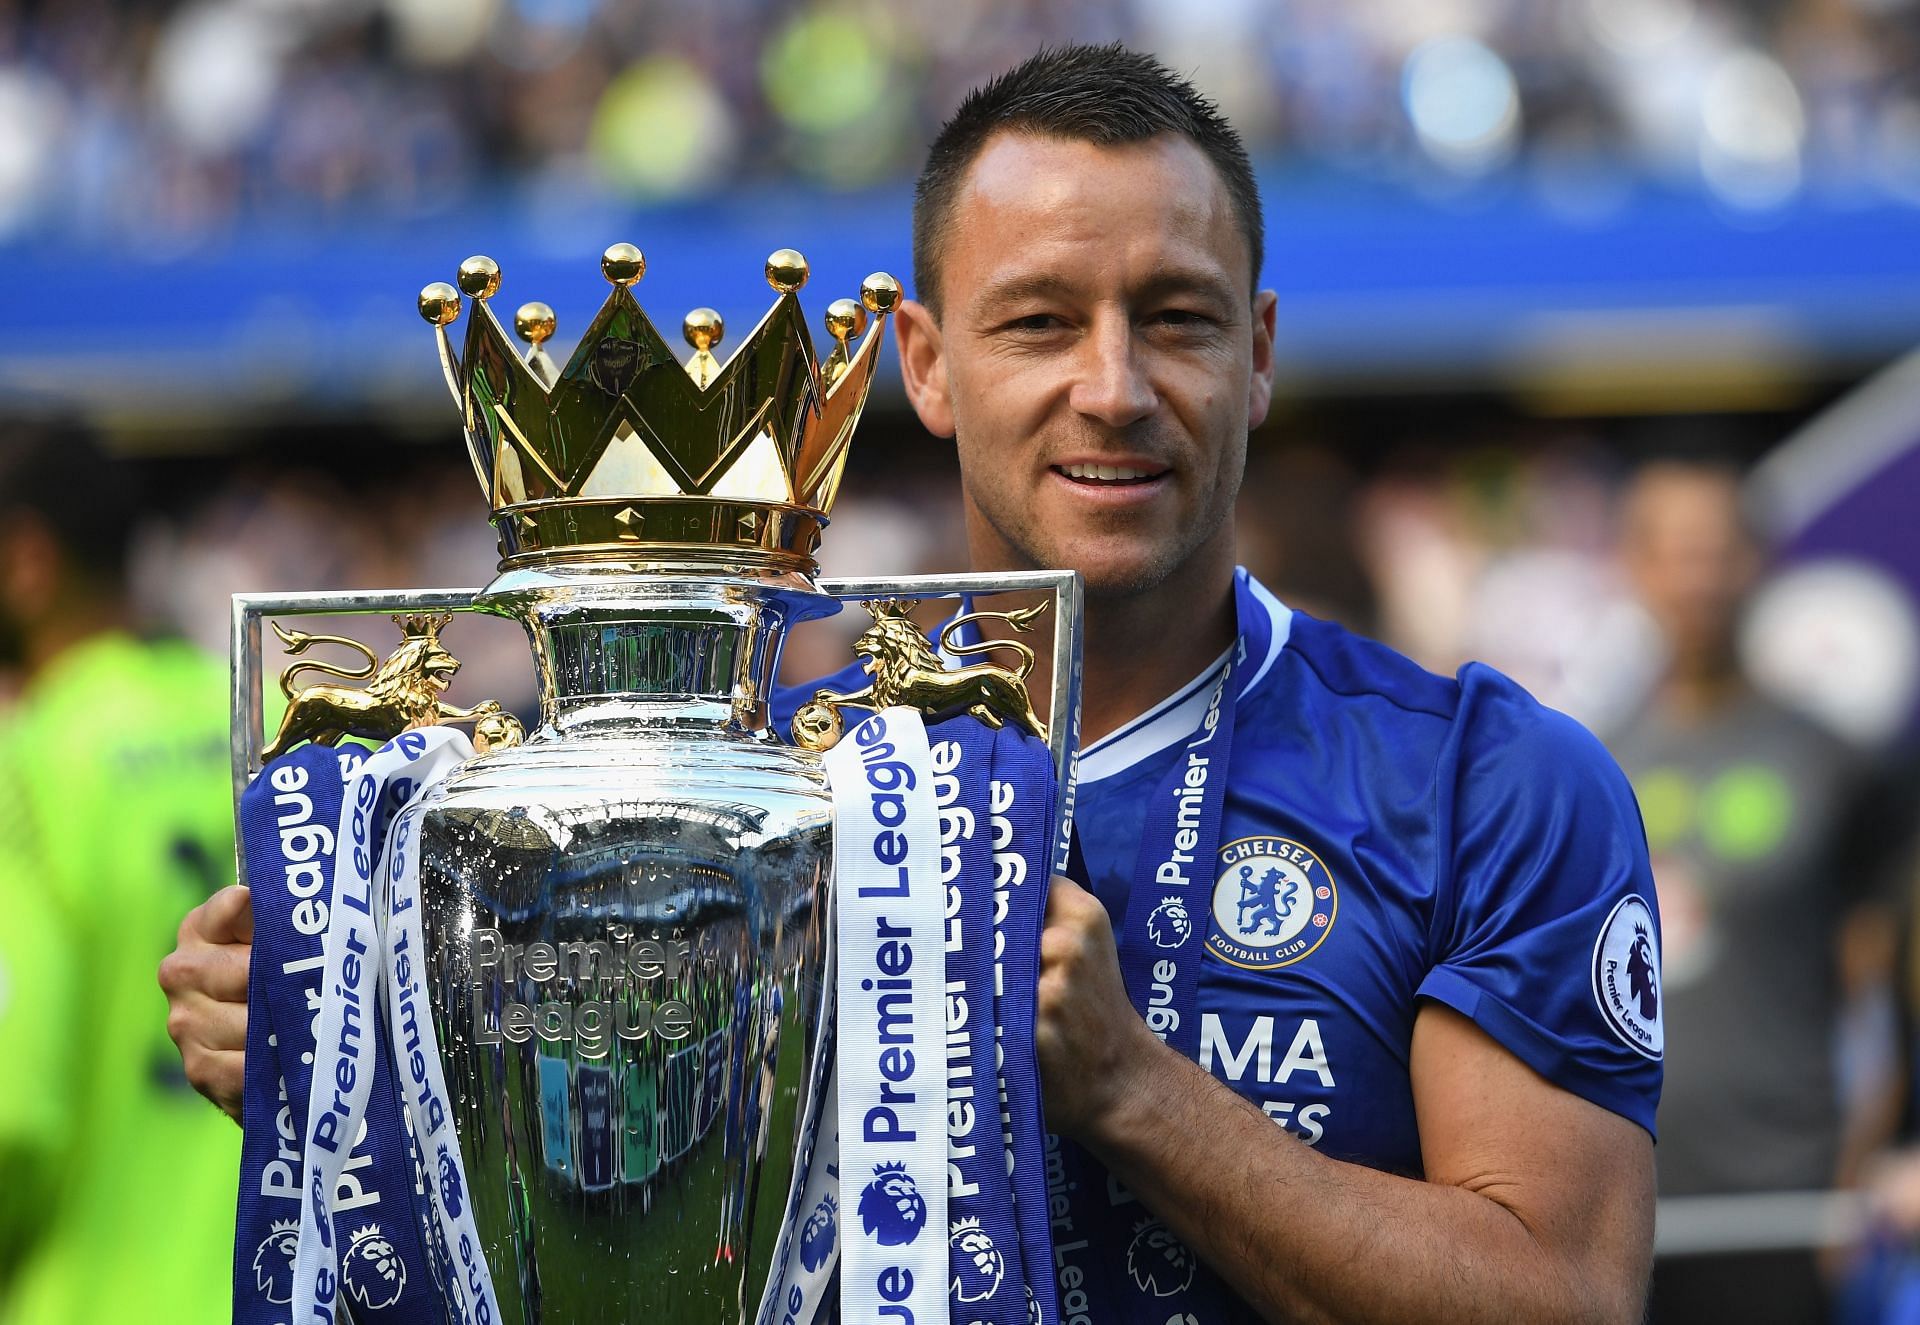 Terry was a former Chelsea captain